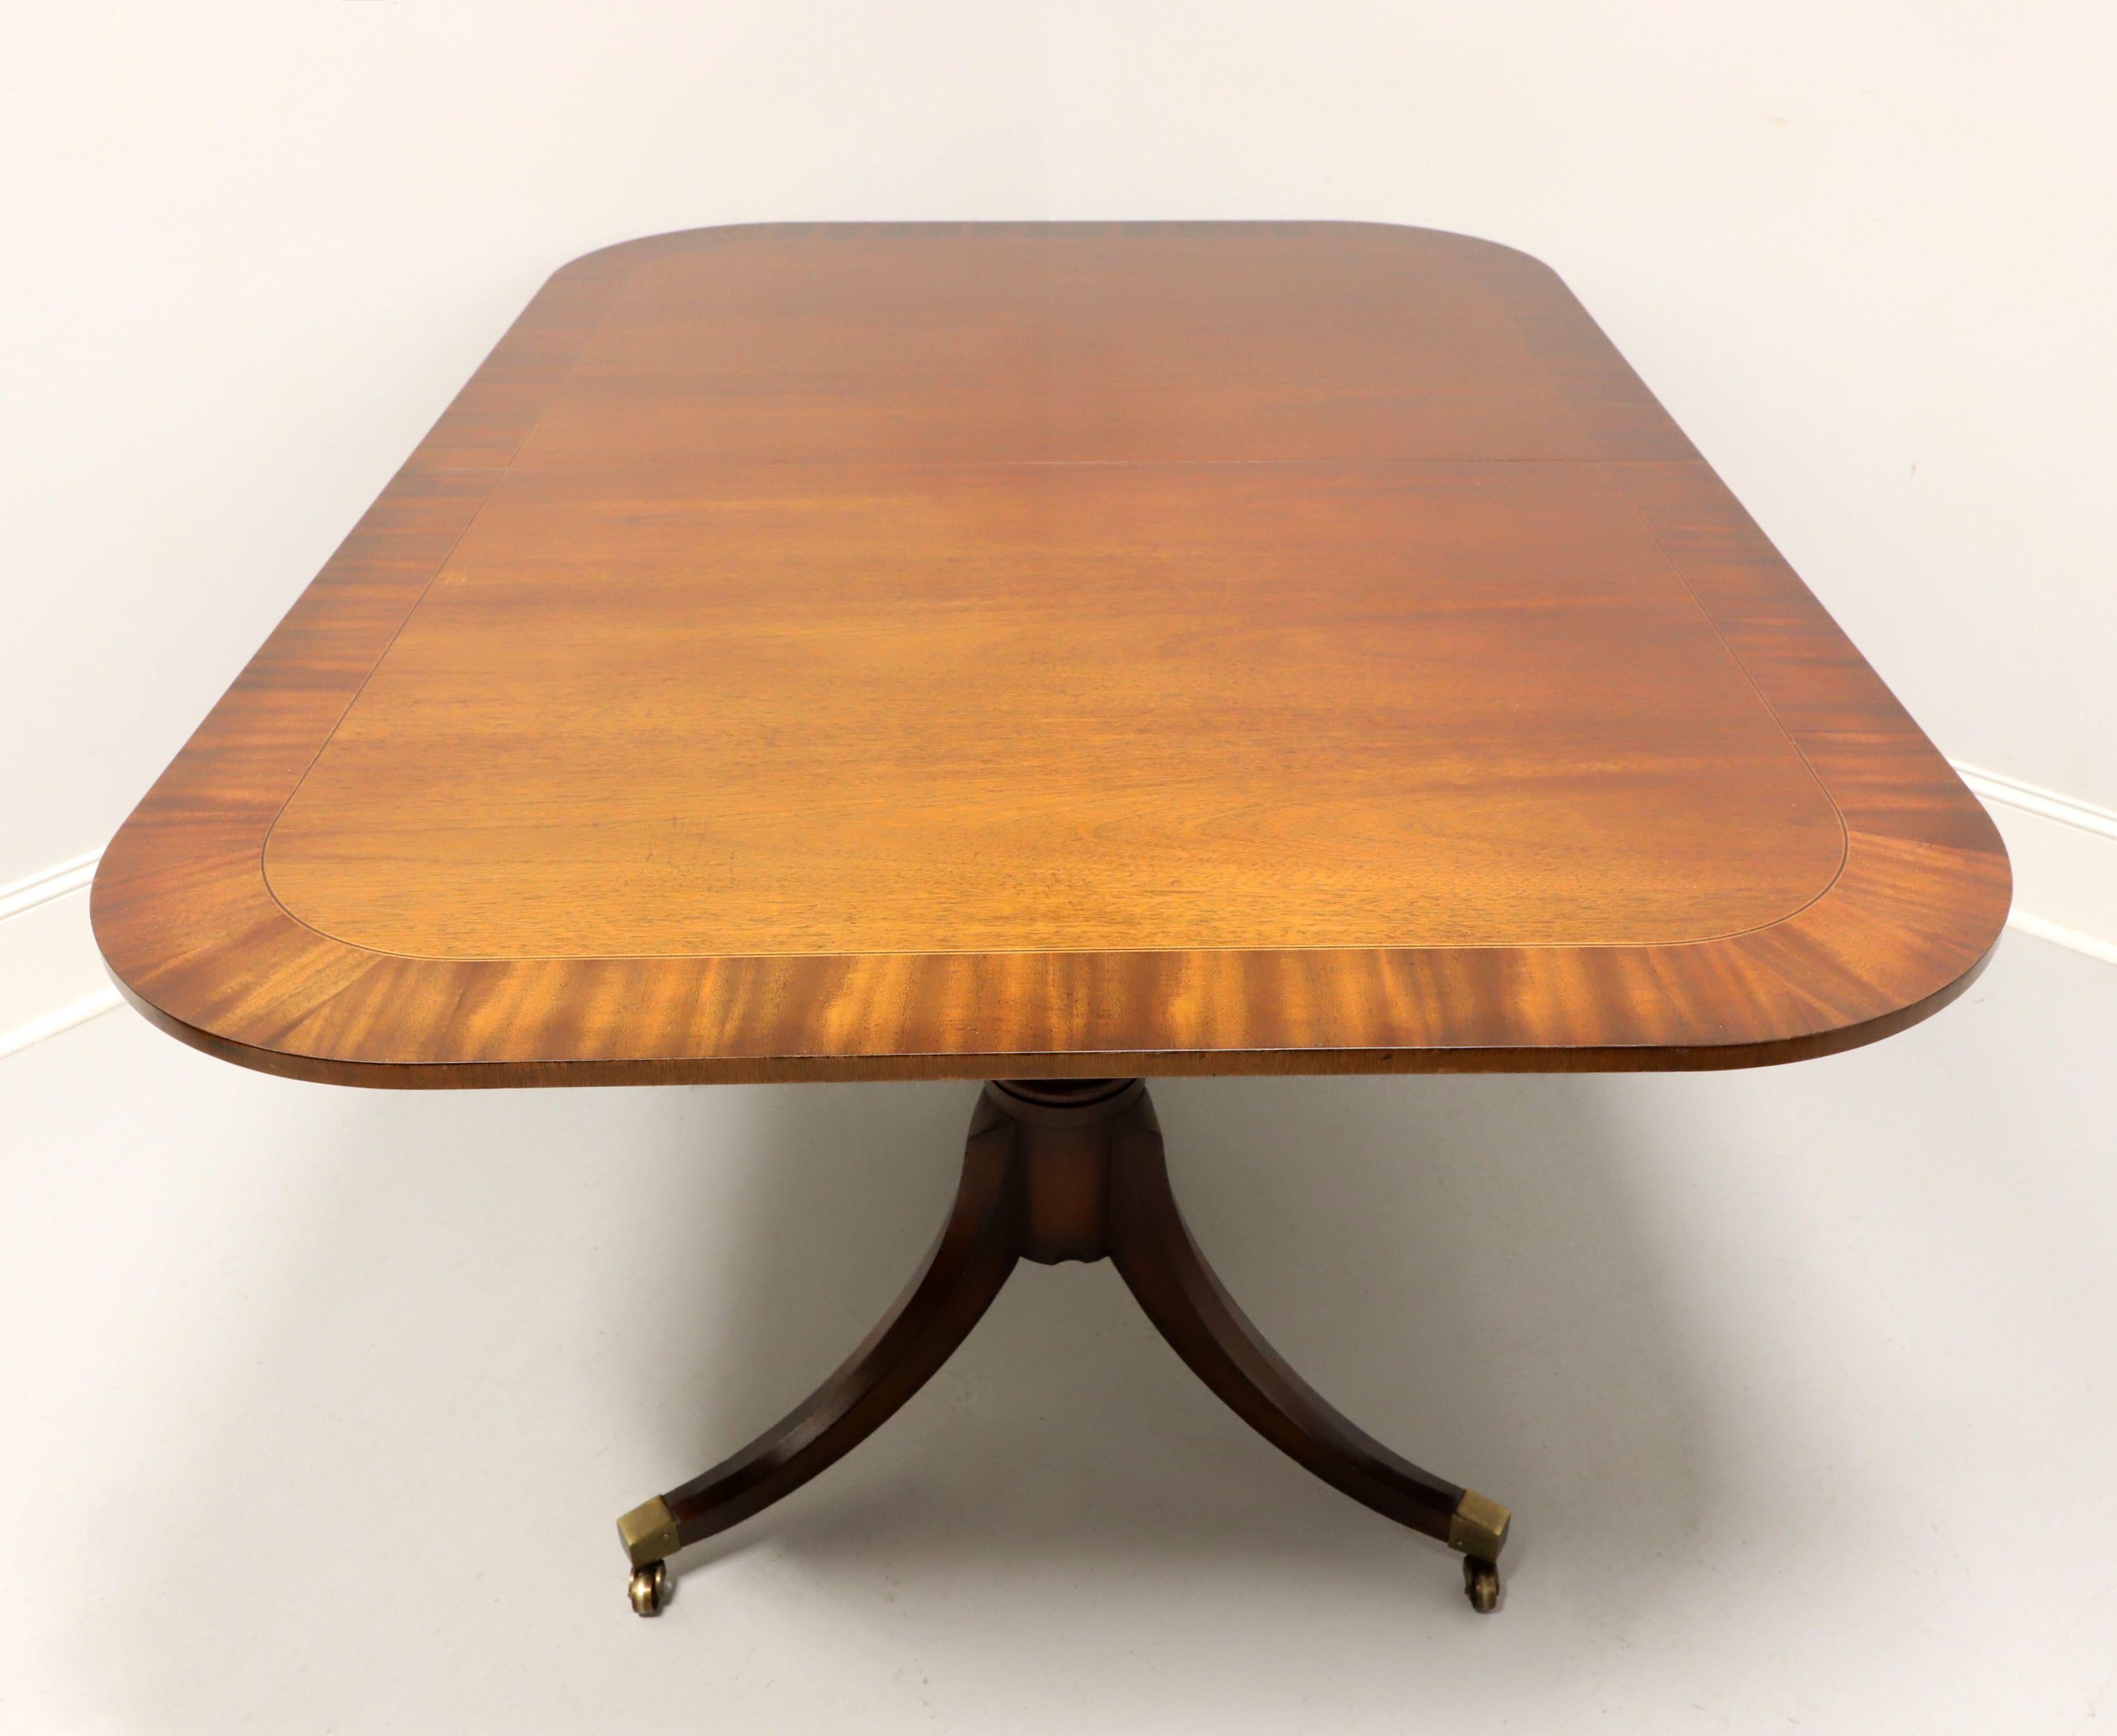 A Traditional Sheraton style dining table by Baker Furniture Company, from their Historic Charleston Collection. Mahogany, banded top with string inlay, smooth edge, carved double pedestals with three legs, brass toe caps and casters. Includes two